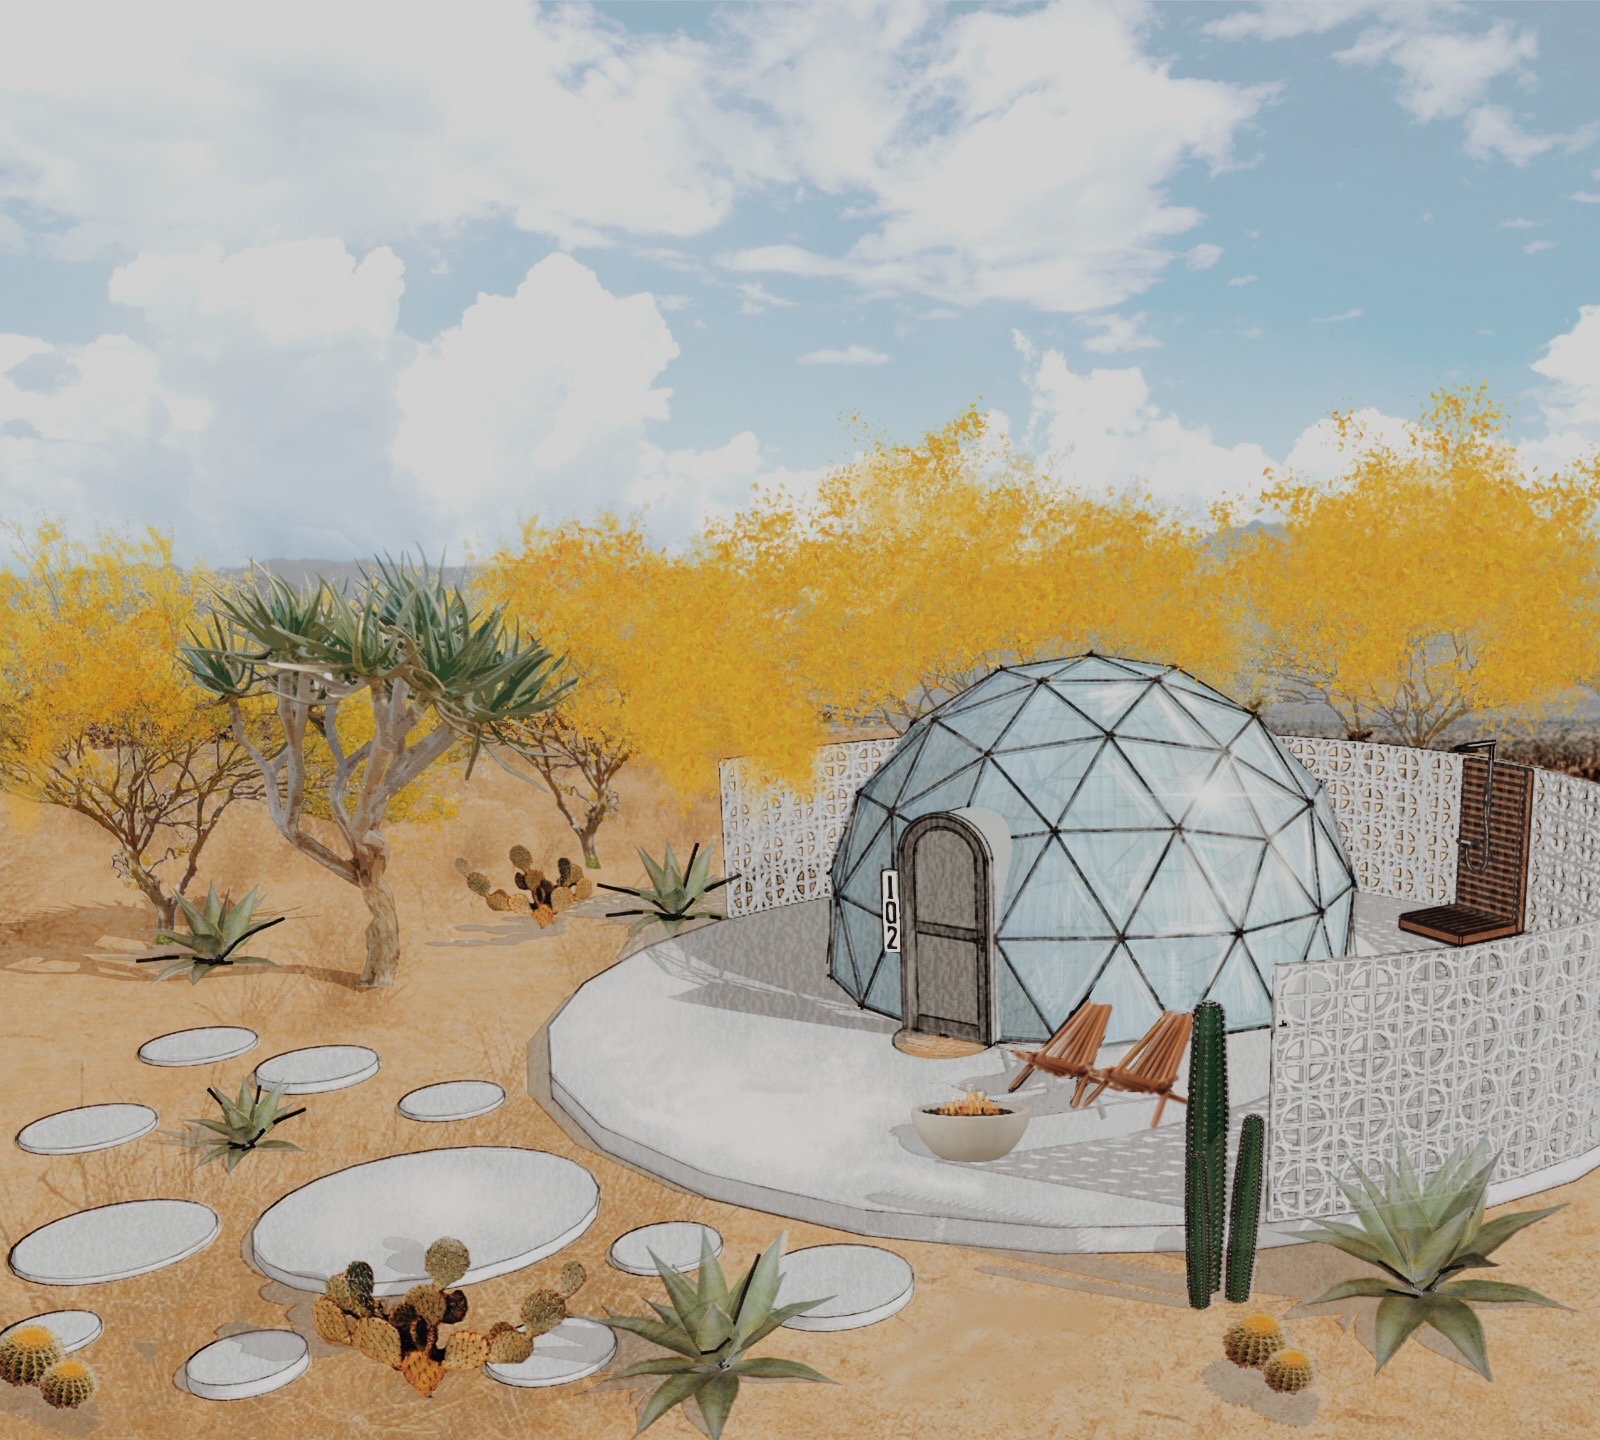 Reflective Geodesic Dome rendering